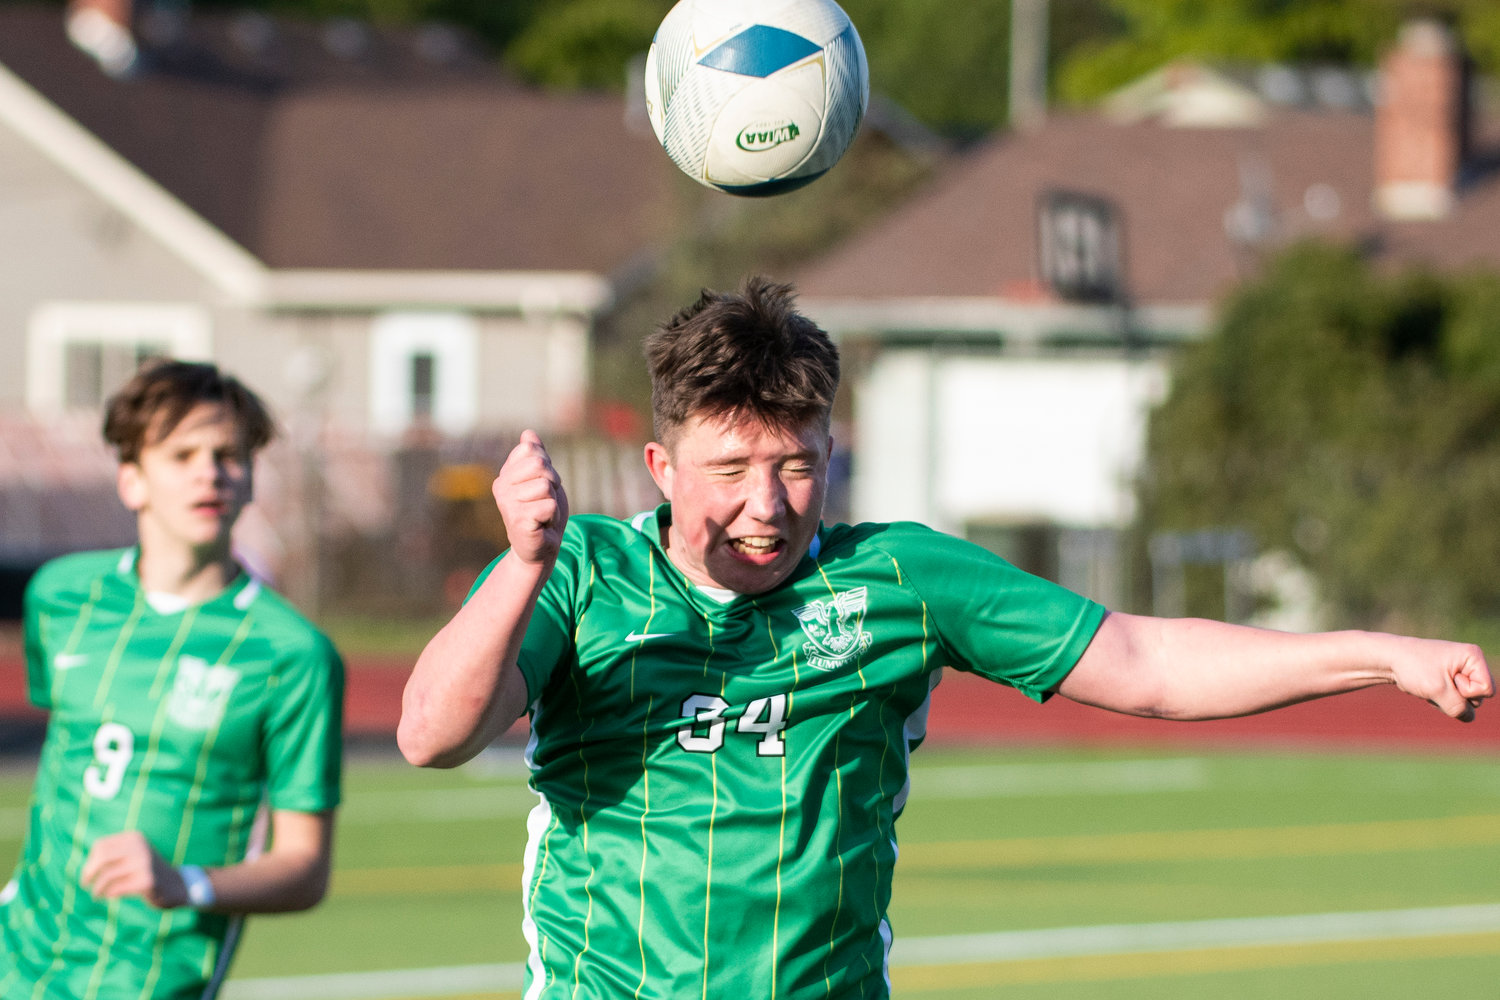 Tumwater's Andrew Lowe (34) heads the ball during the district semifinals against W.F. West on May 12.